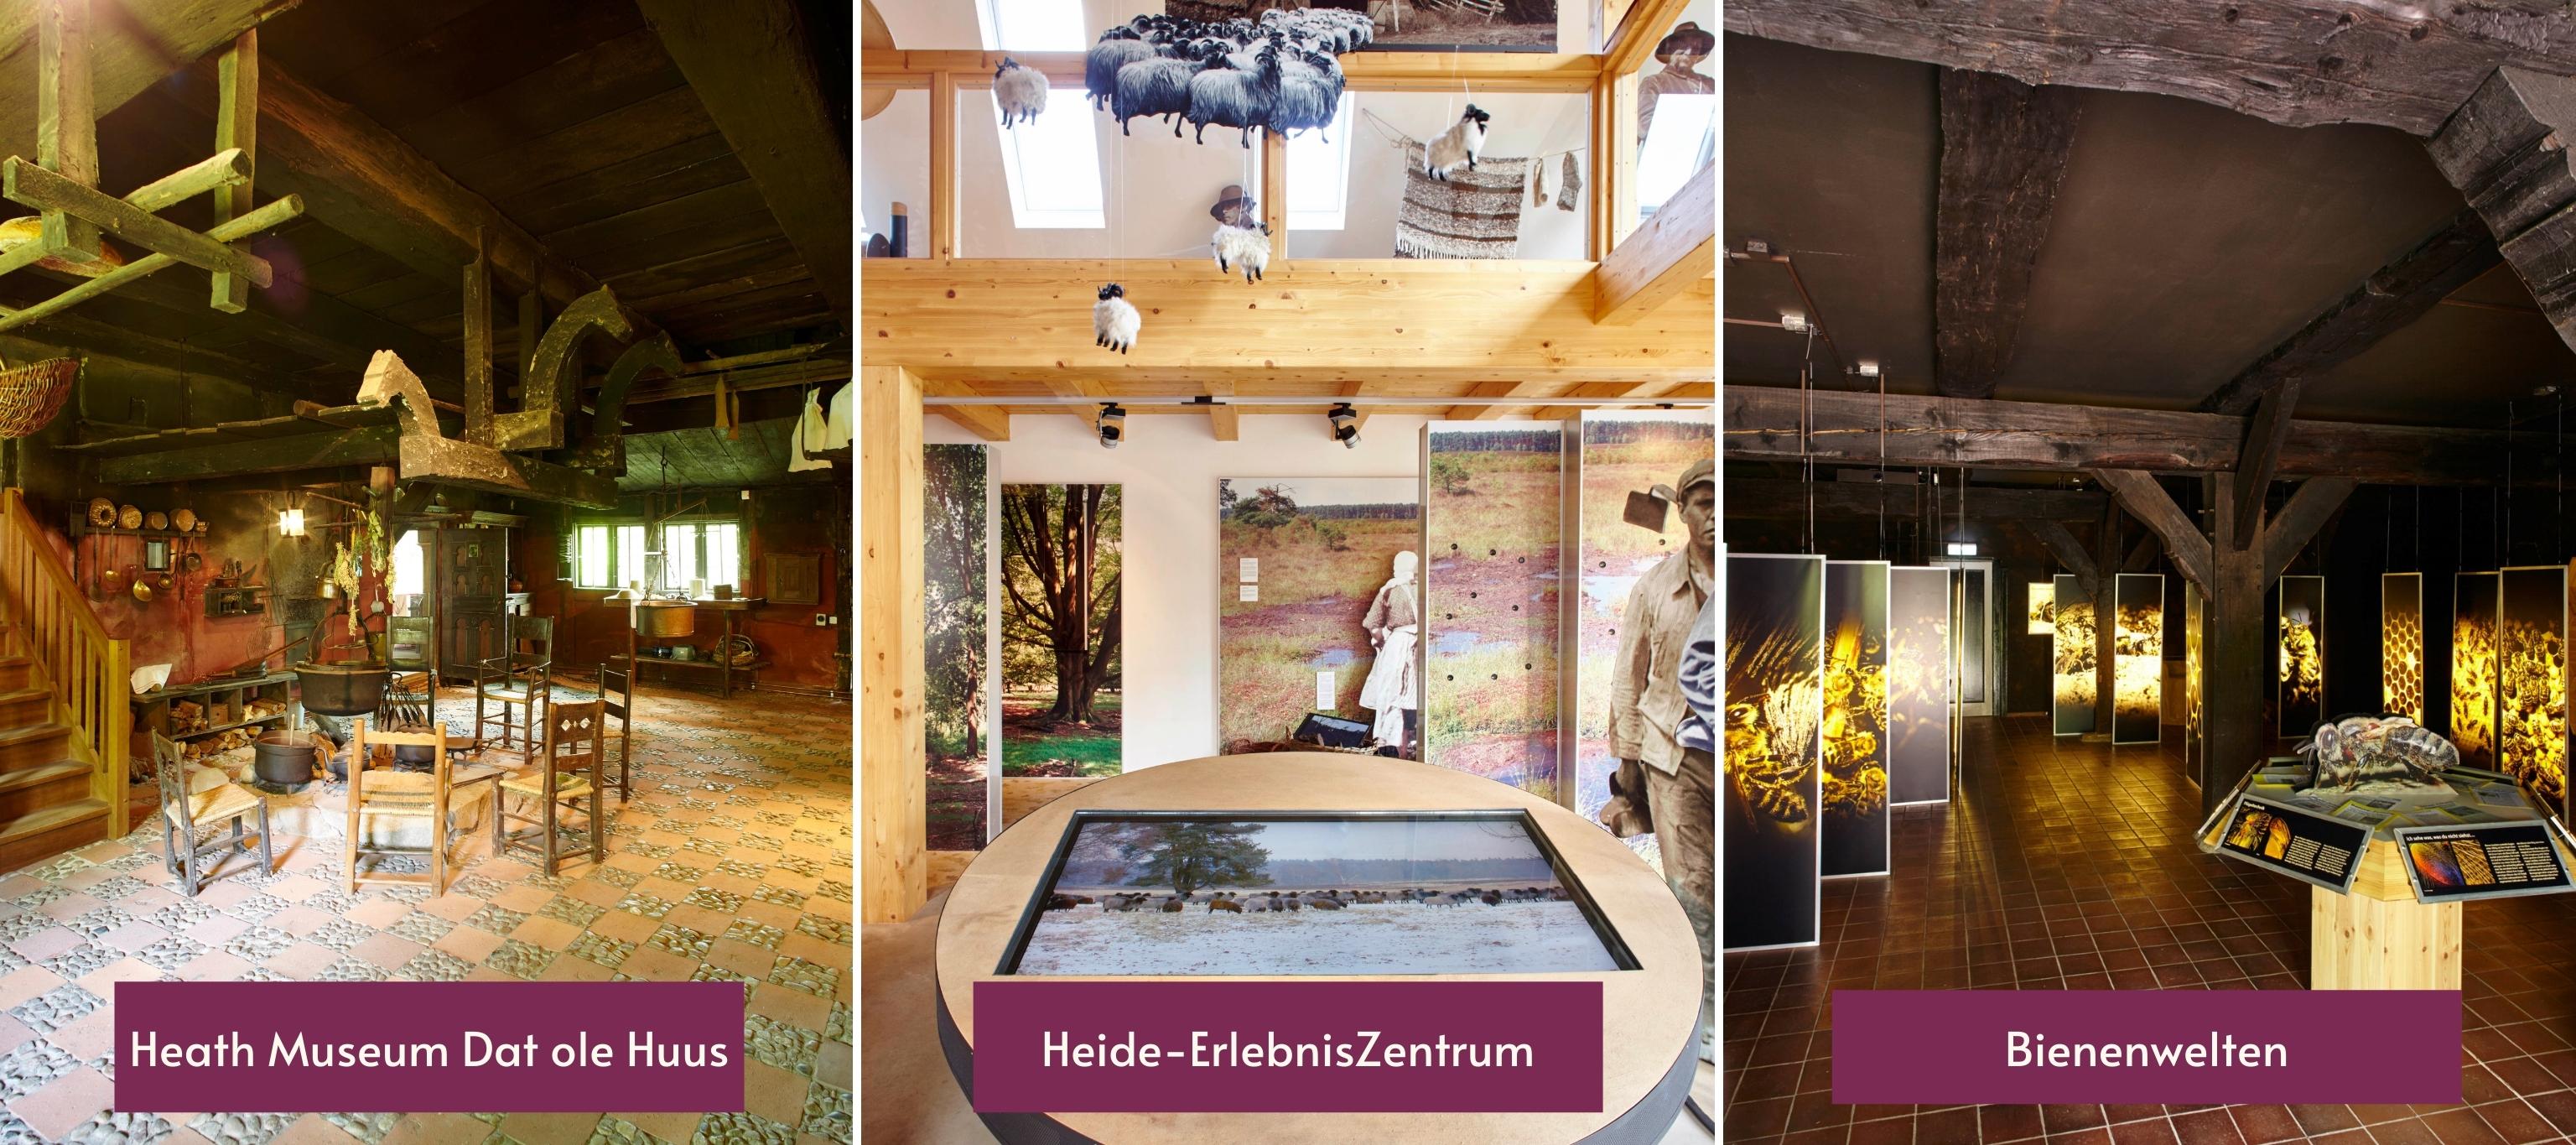 Visit the Exhbitions and museums of the VNP in the Lueneburg Heath